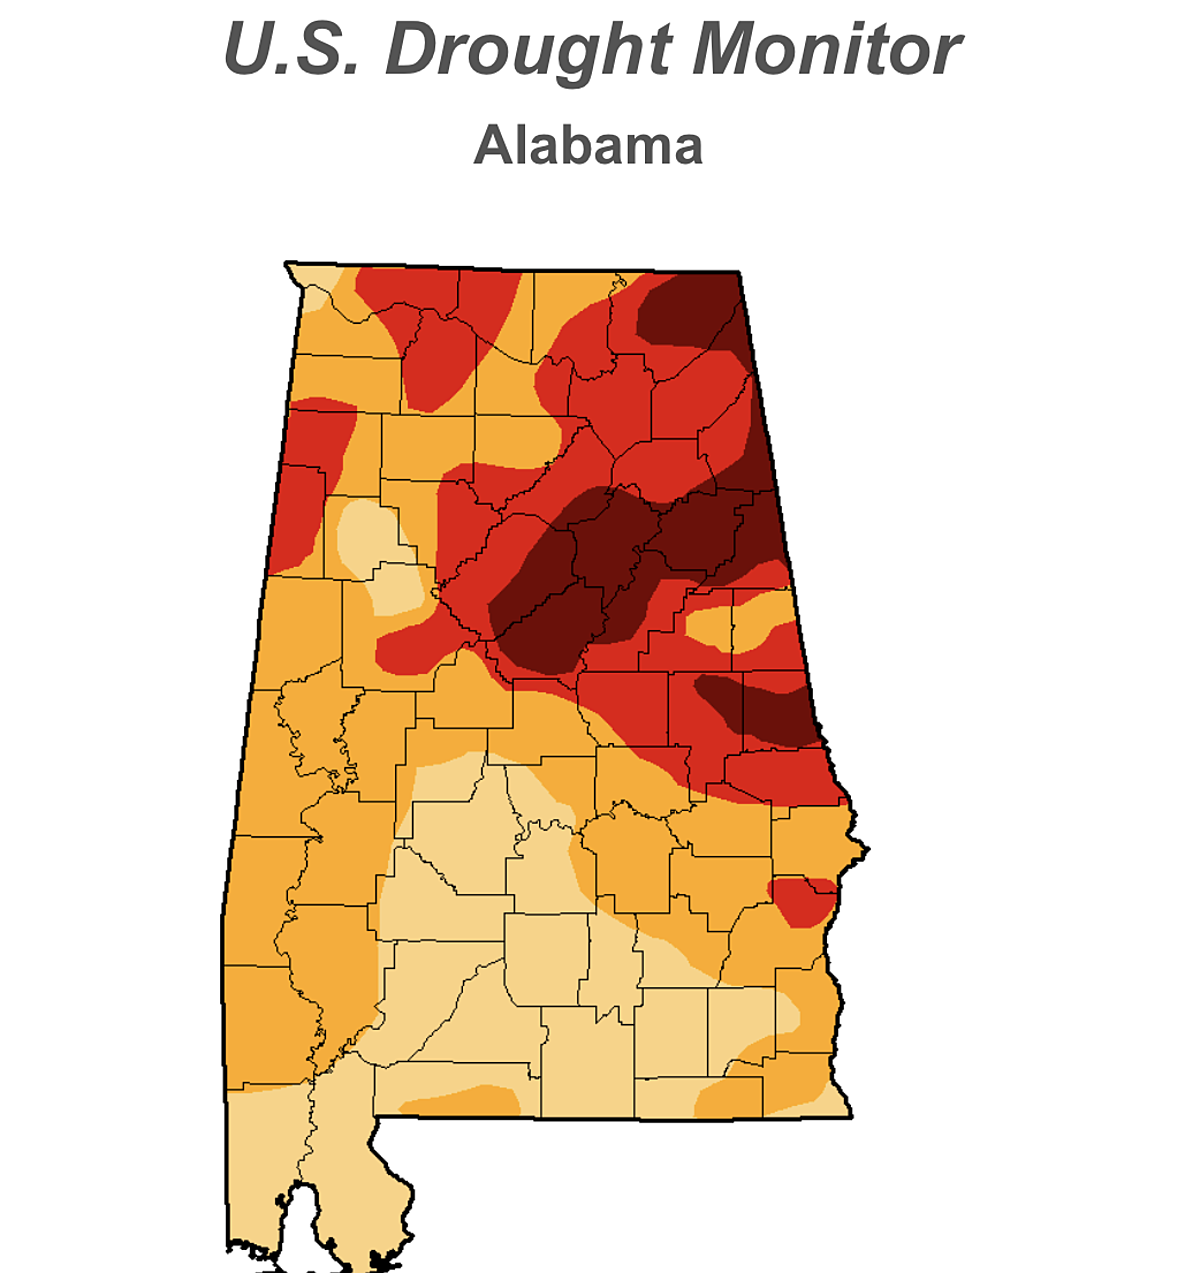 Alabama’s Drought, The Worst We’ve in 5 Years